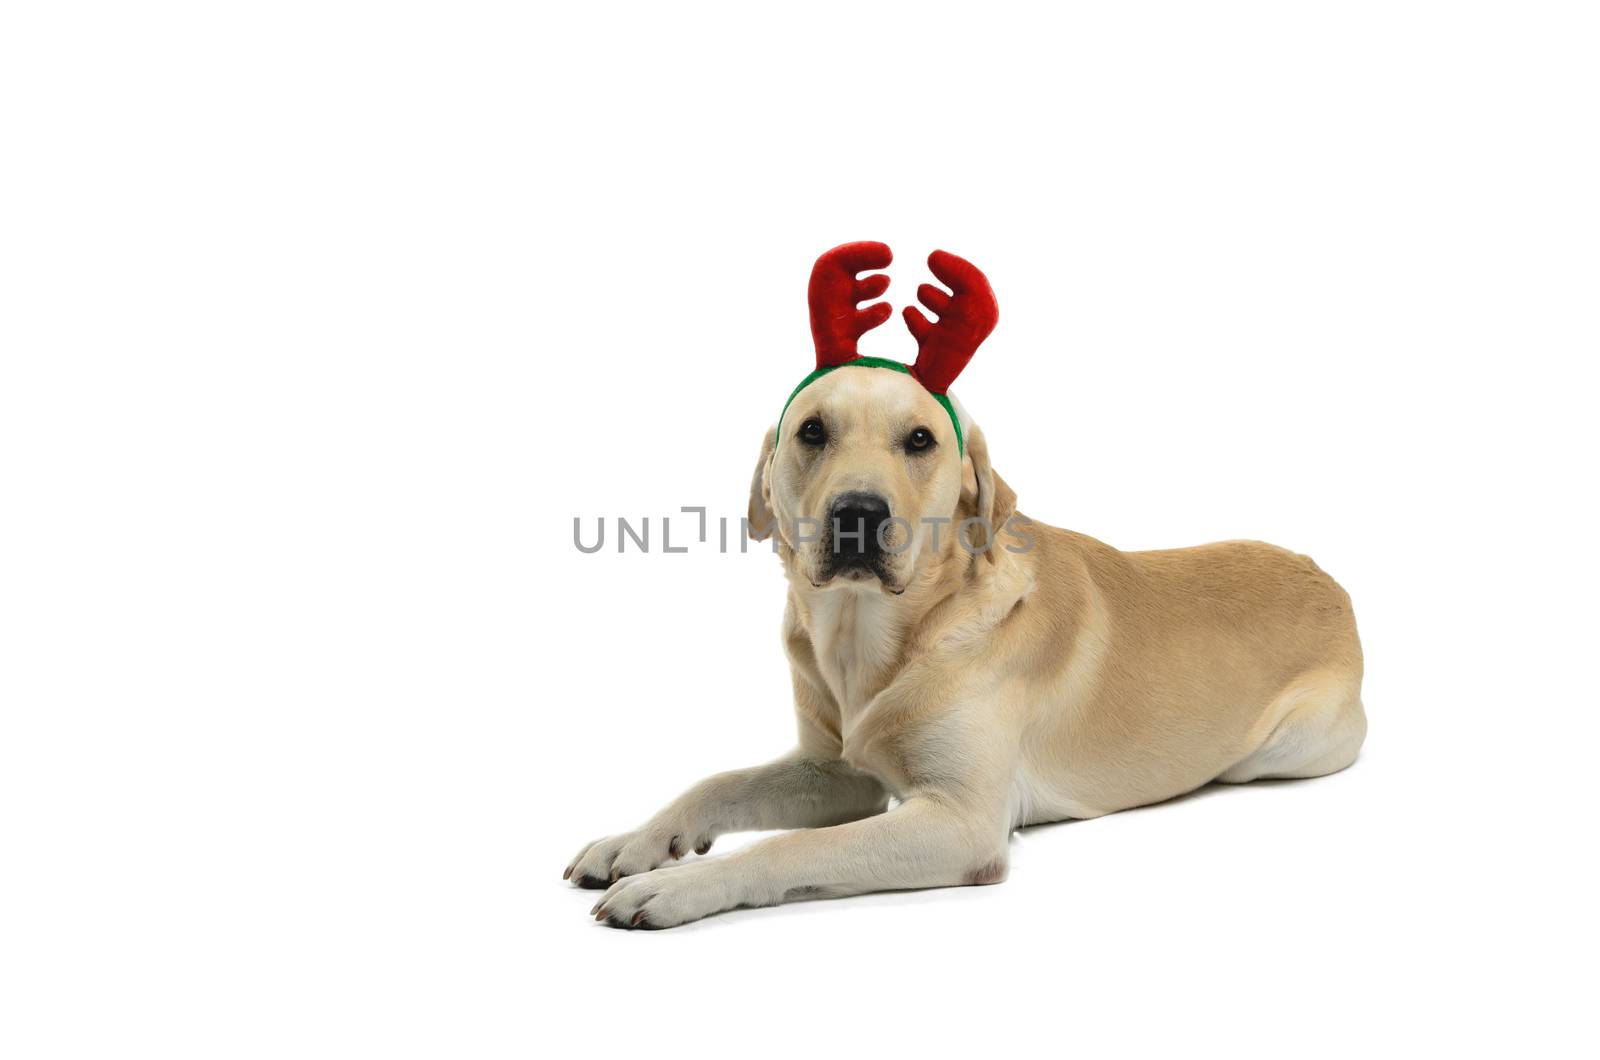 dog with reindeer antlers, costume, studio photoshoot in front of white background